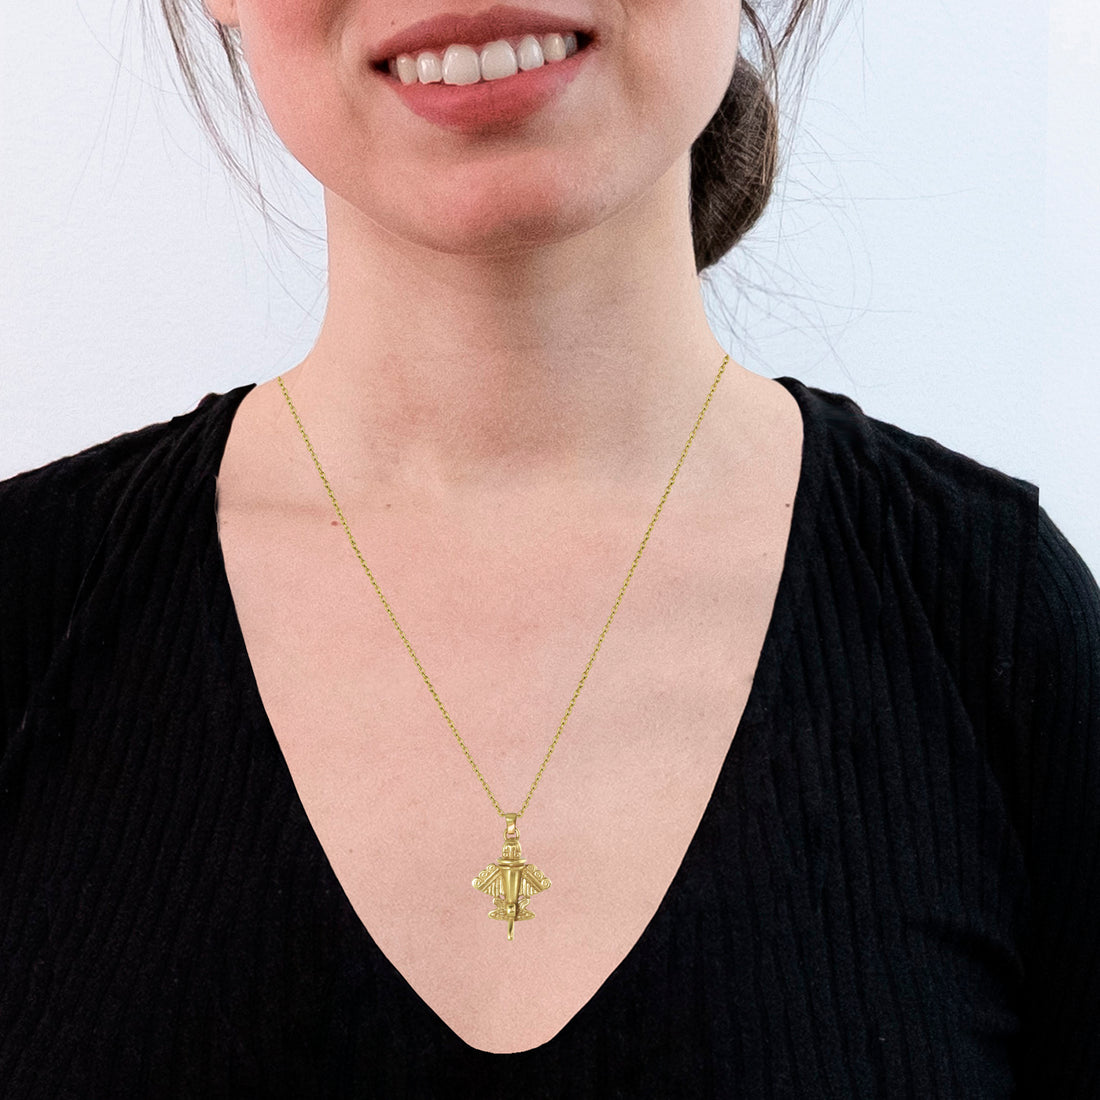 Quimbaya Flyer Golden Jet-9 18k Solid Gold Necklace by Across The Puddle